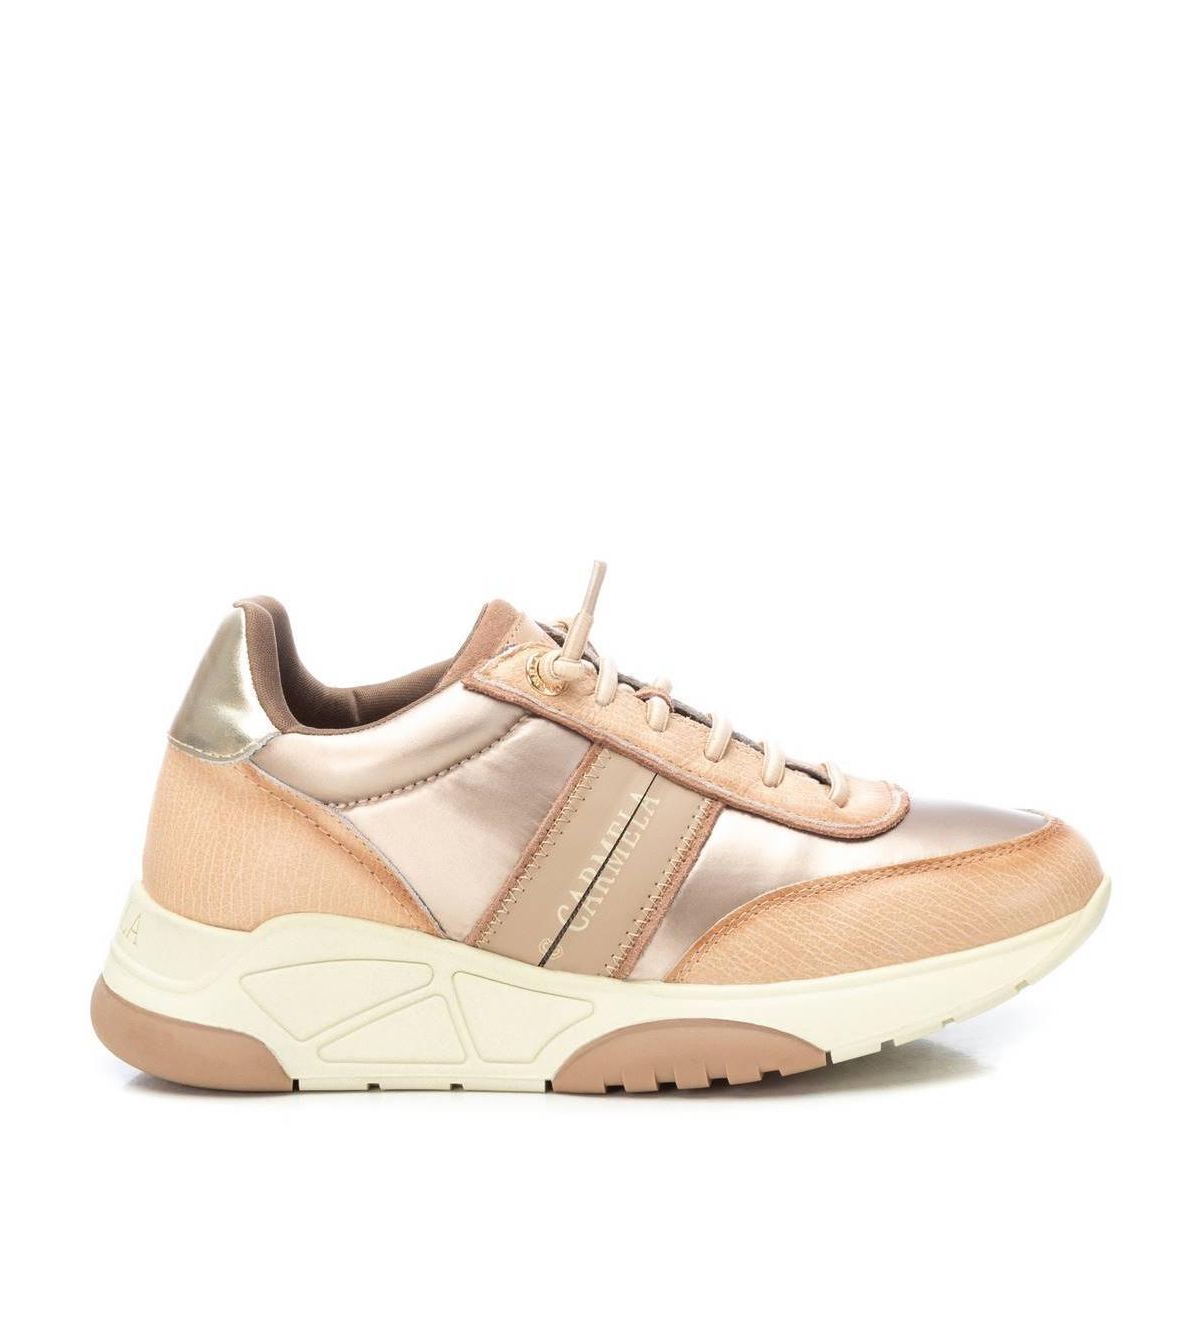 Women's Casual Sneakers Carmela Collection By Xti - Beige